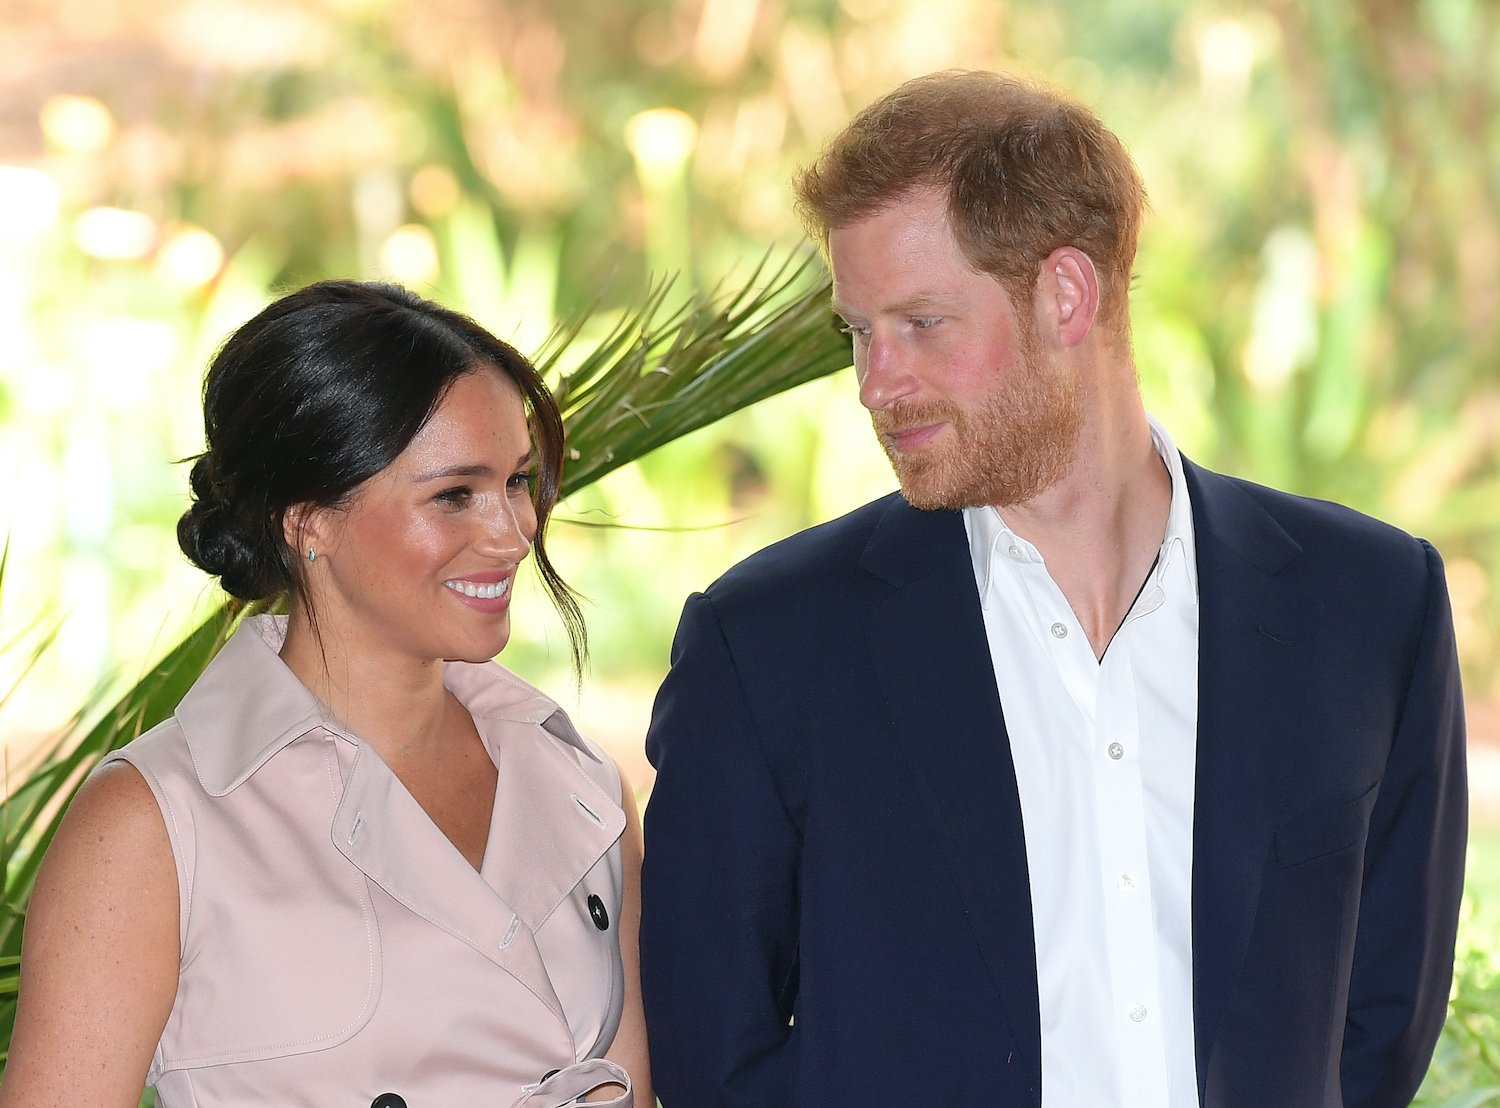 Meghan Markle and Prince Harry attend a reception to celebrate the UK and South Africa’s important business and investment relationship at the High Commissioner’s Residence, Johannesburg, South Africa